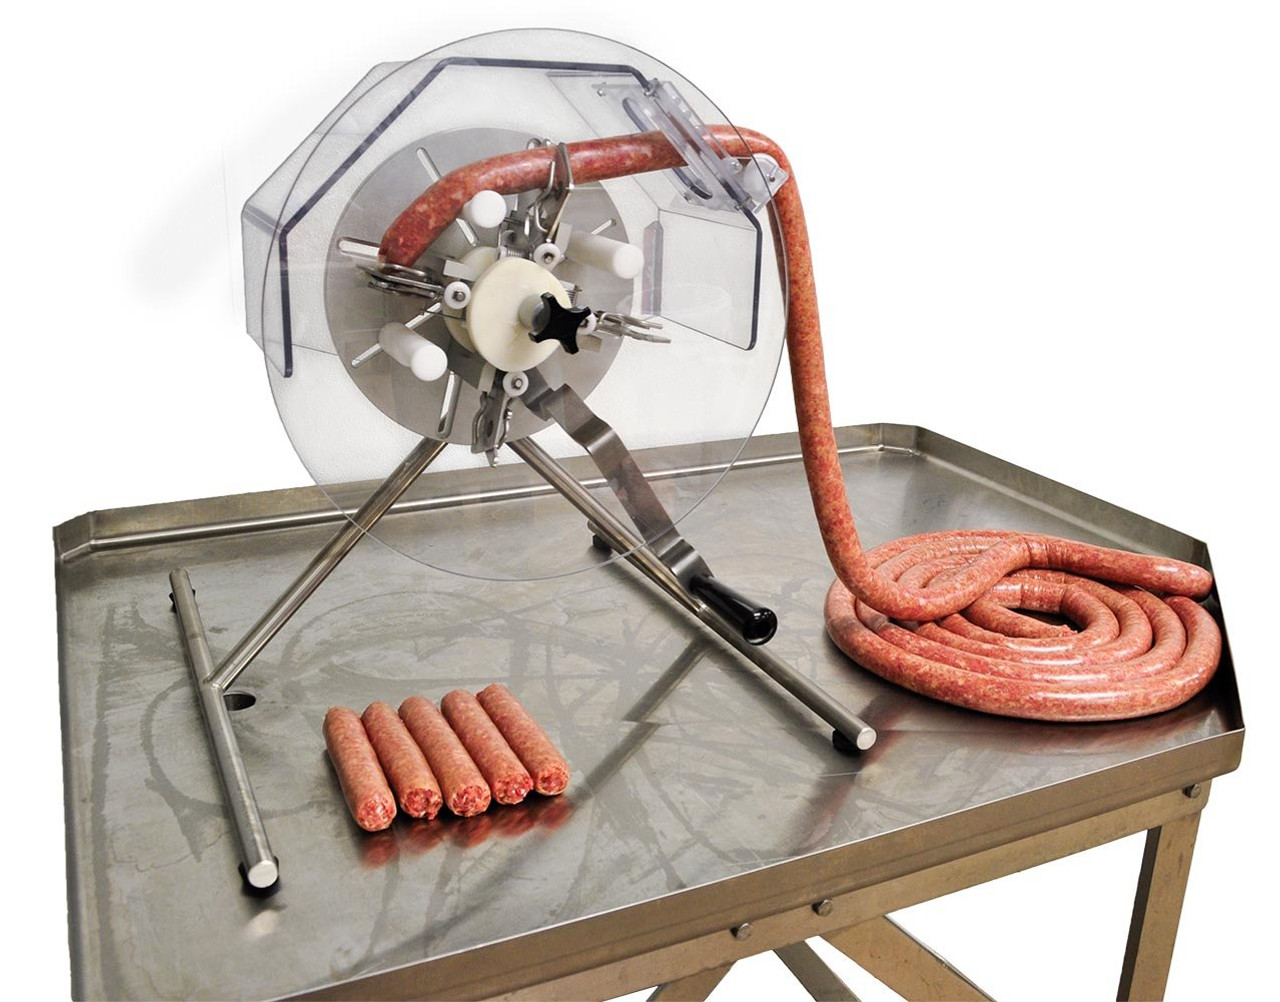 The Sausage Maker - Sausage making equipment and supplies.